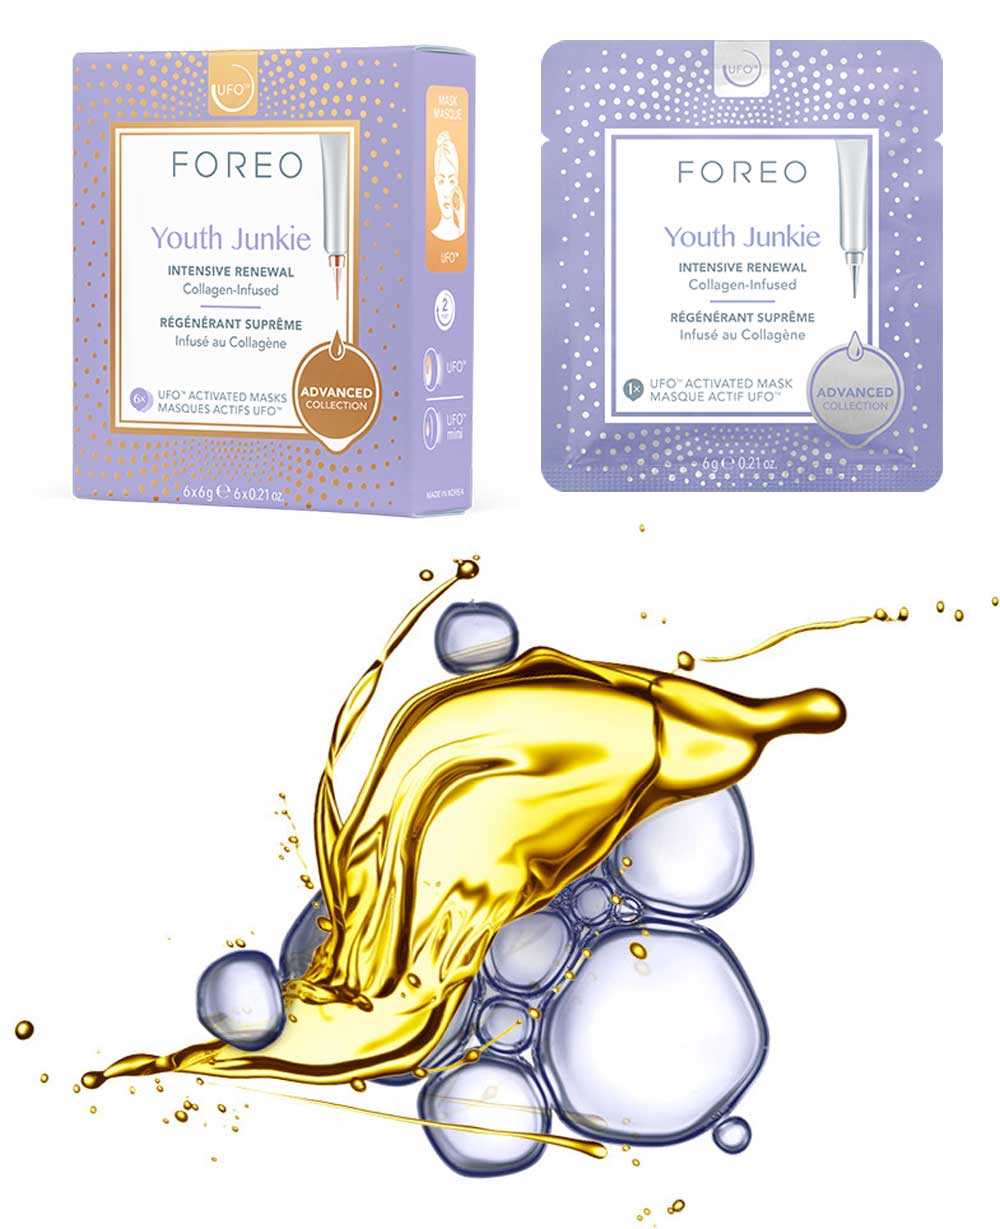 Youth Junkie Mask Foreo